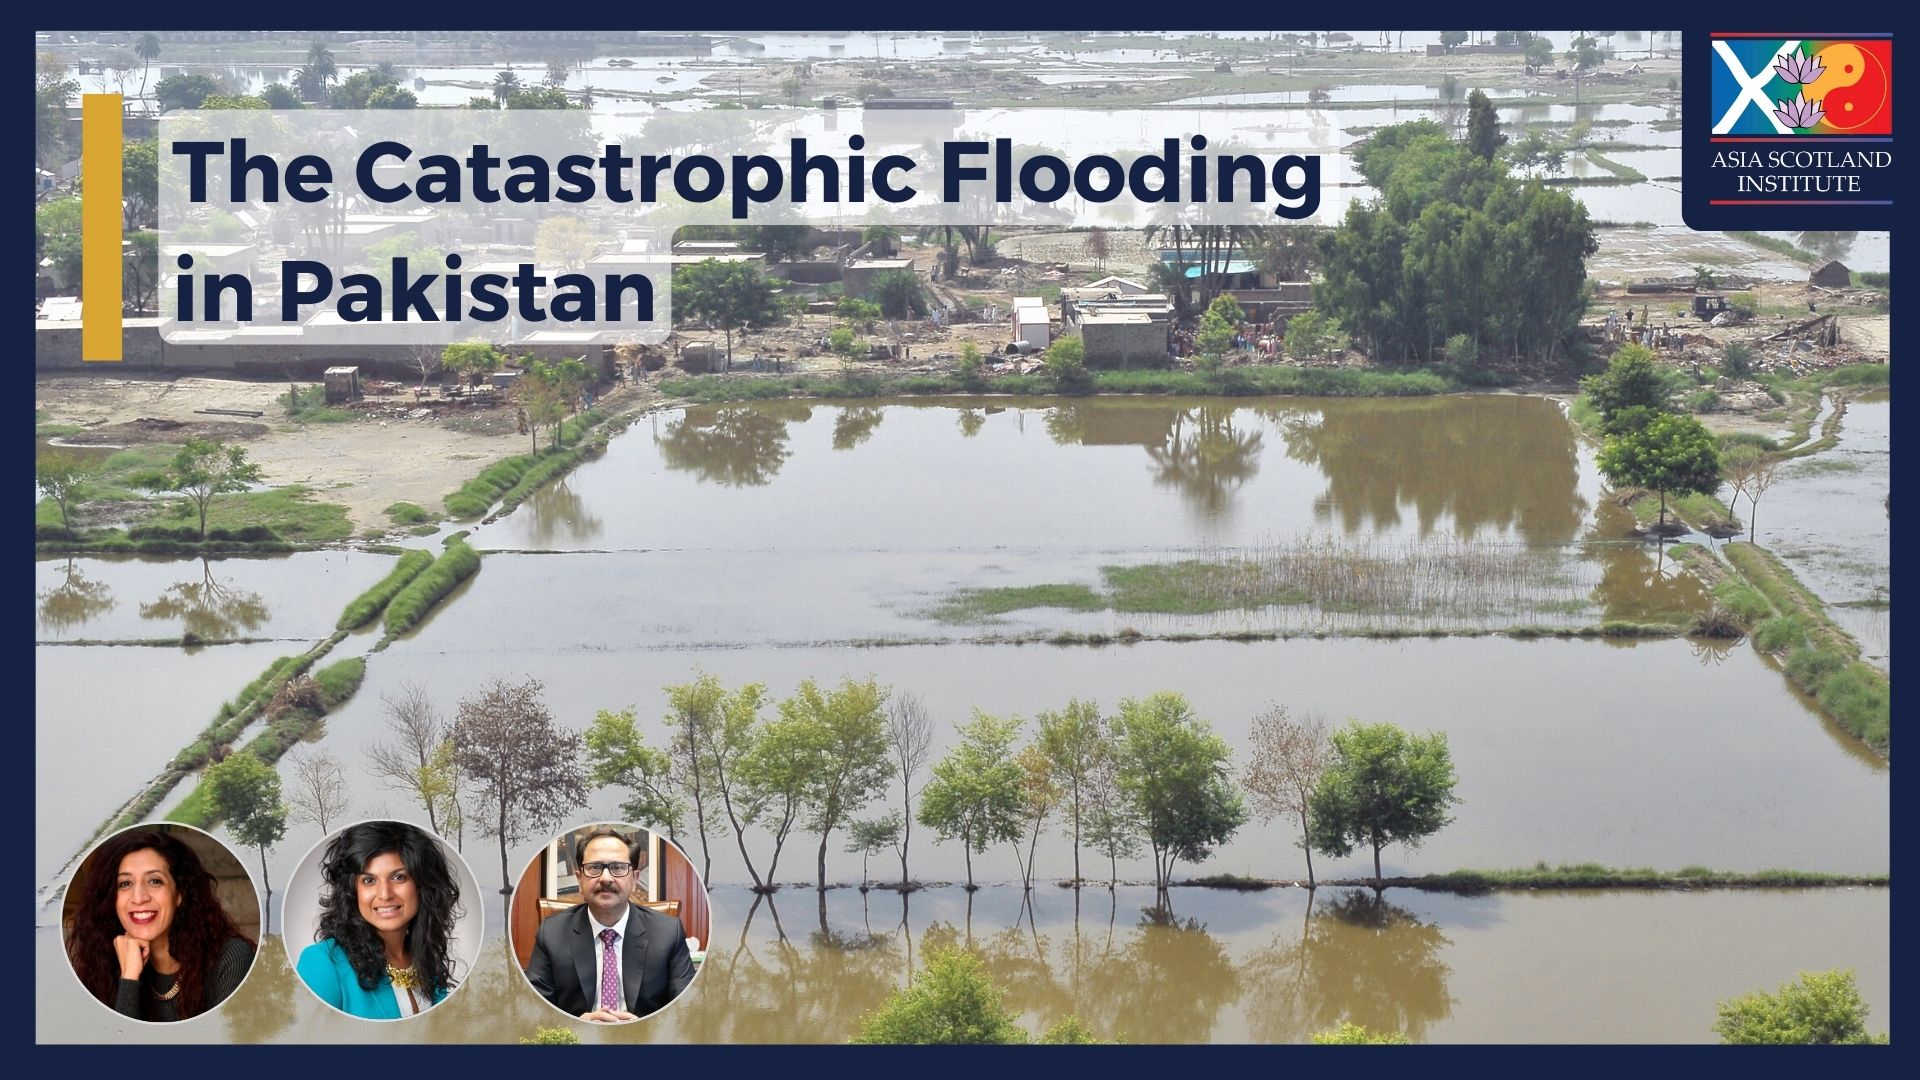 The Catastrophic Flooding in Pakistan YT 1920 × 1080